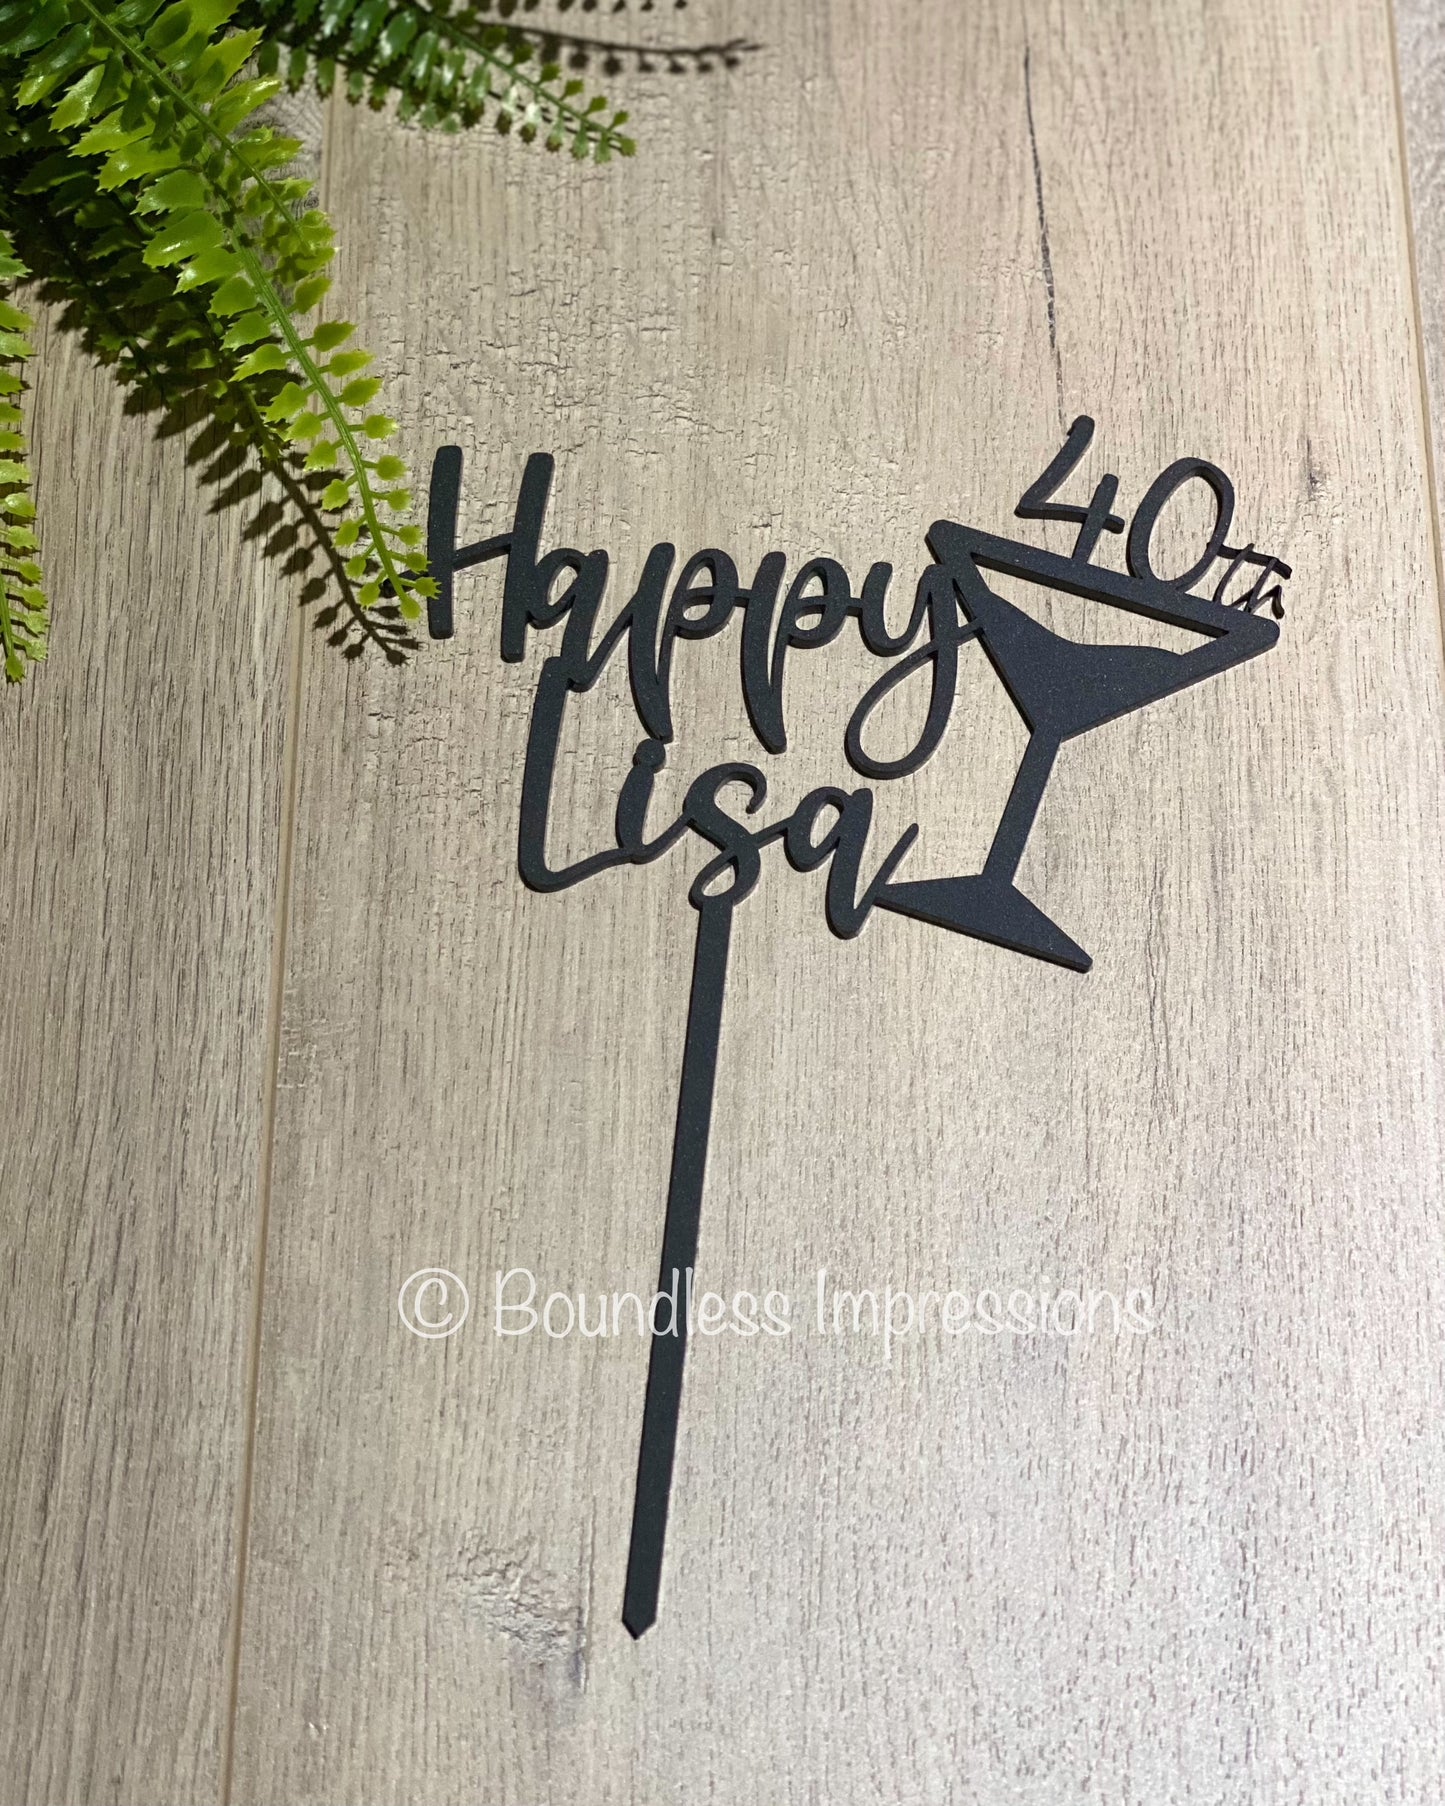 Acrylic Cake Toppers + Image Add On